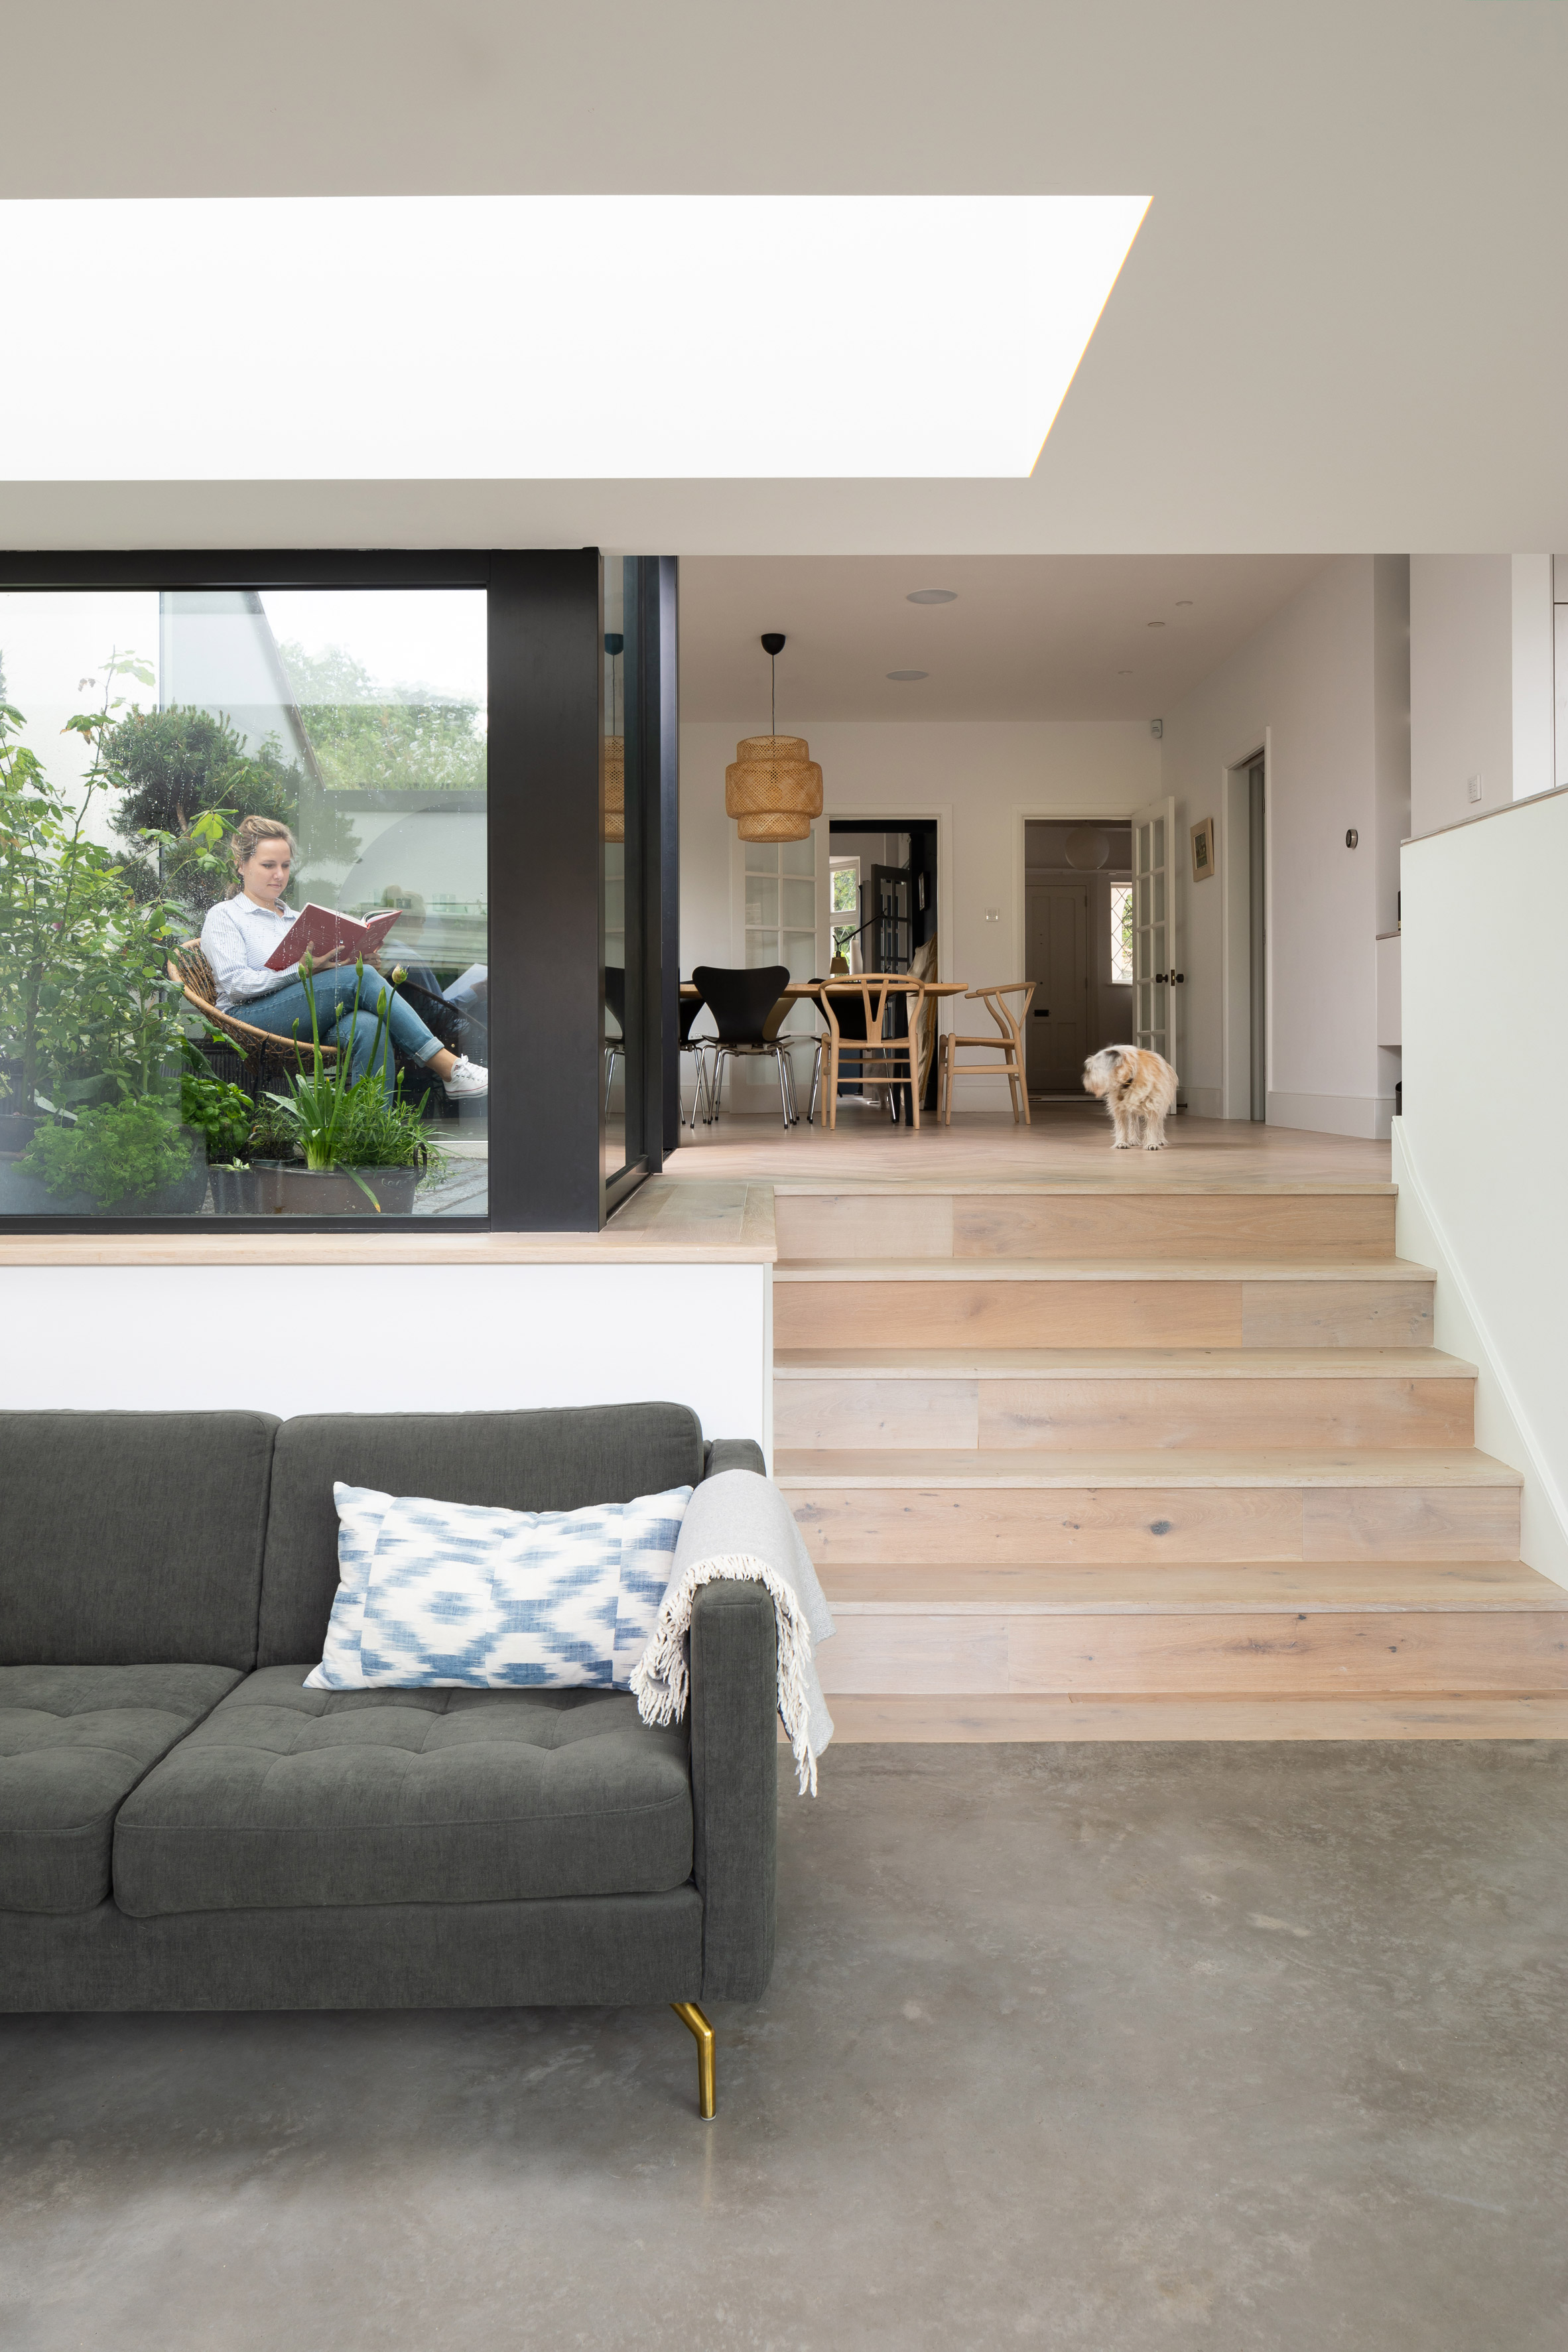 The Courtyard House by Fraher & Findlay